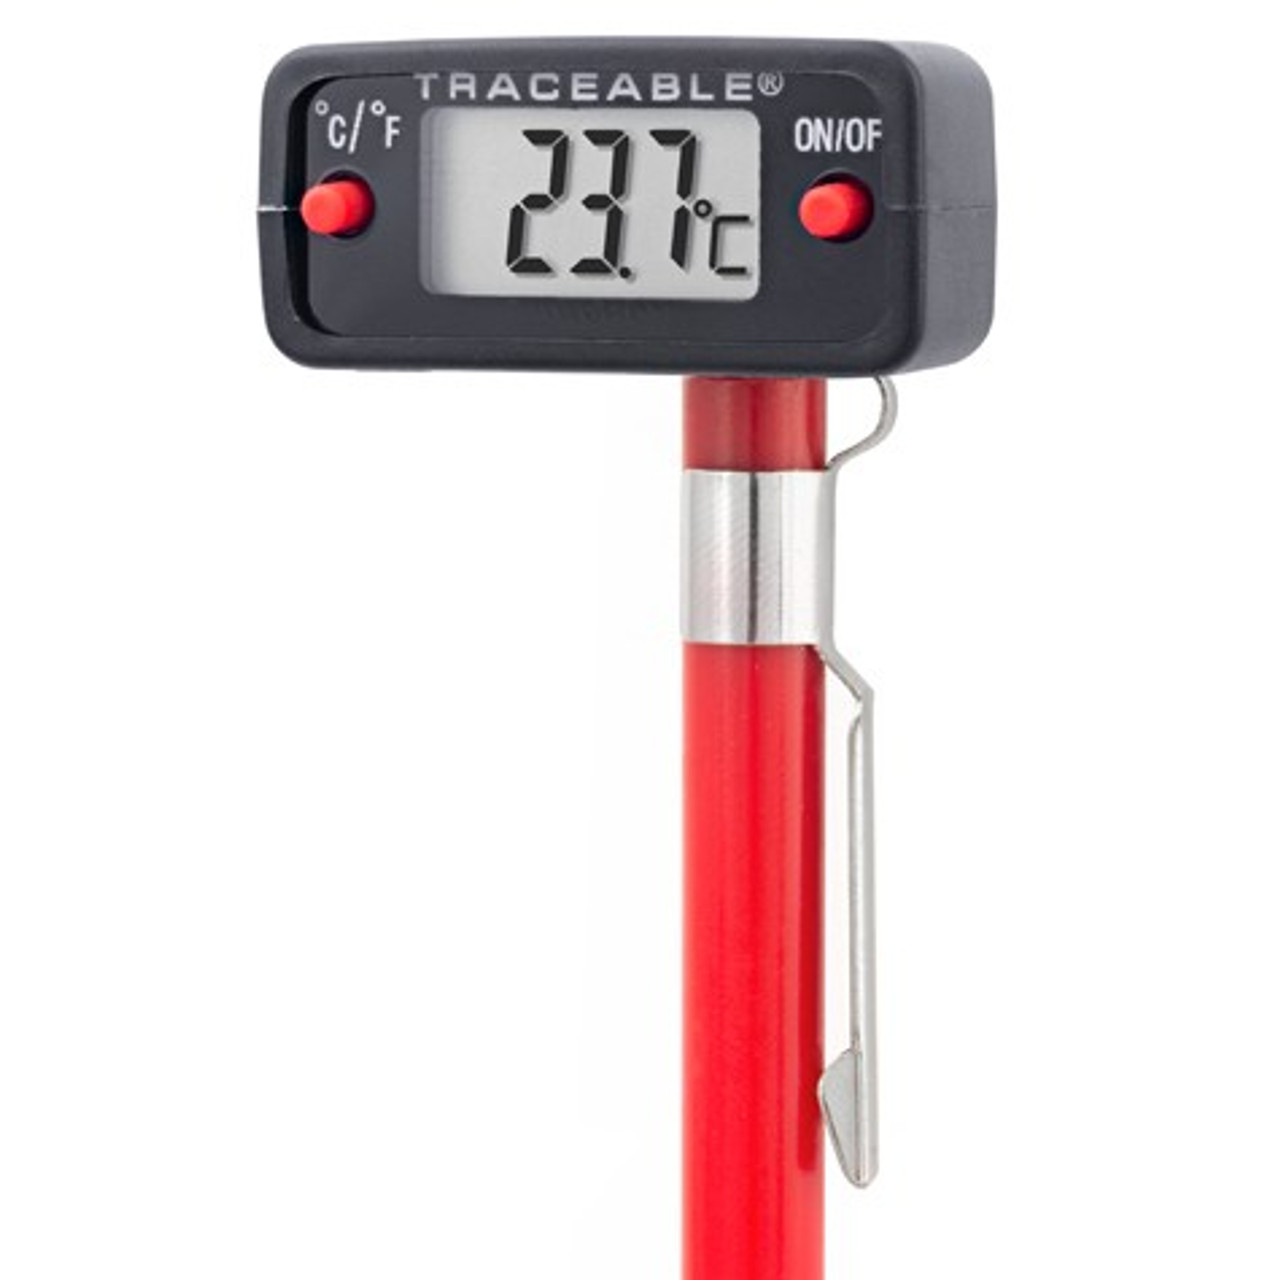 Fisherbrand Digital Thermometers with Stainless-Steel Probe on Cable: Thermometers